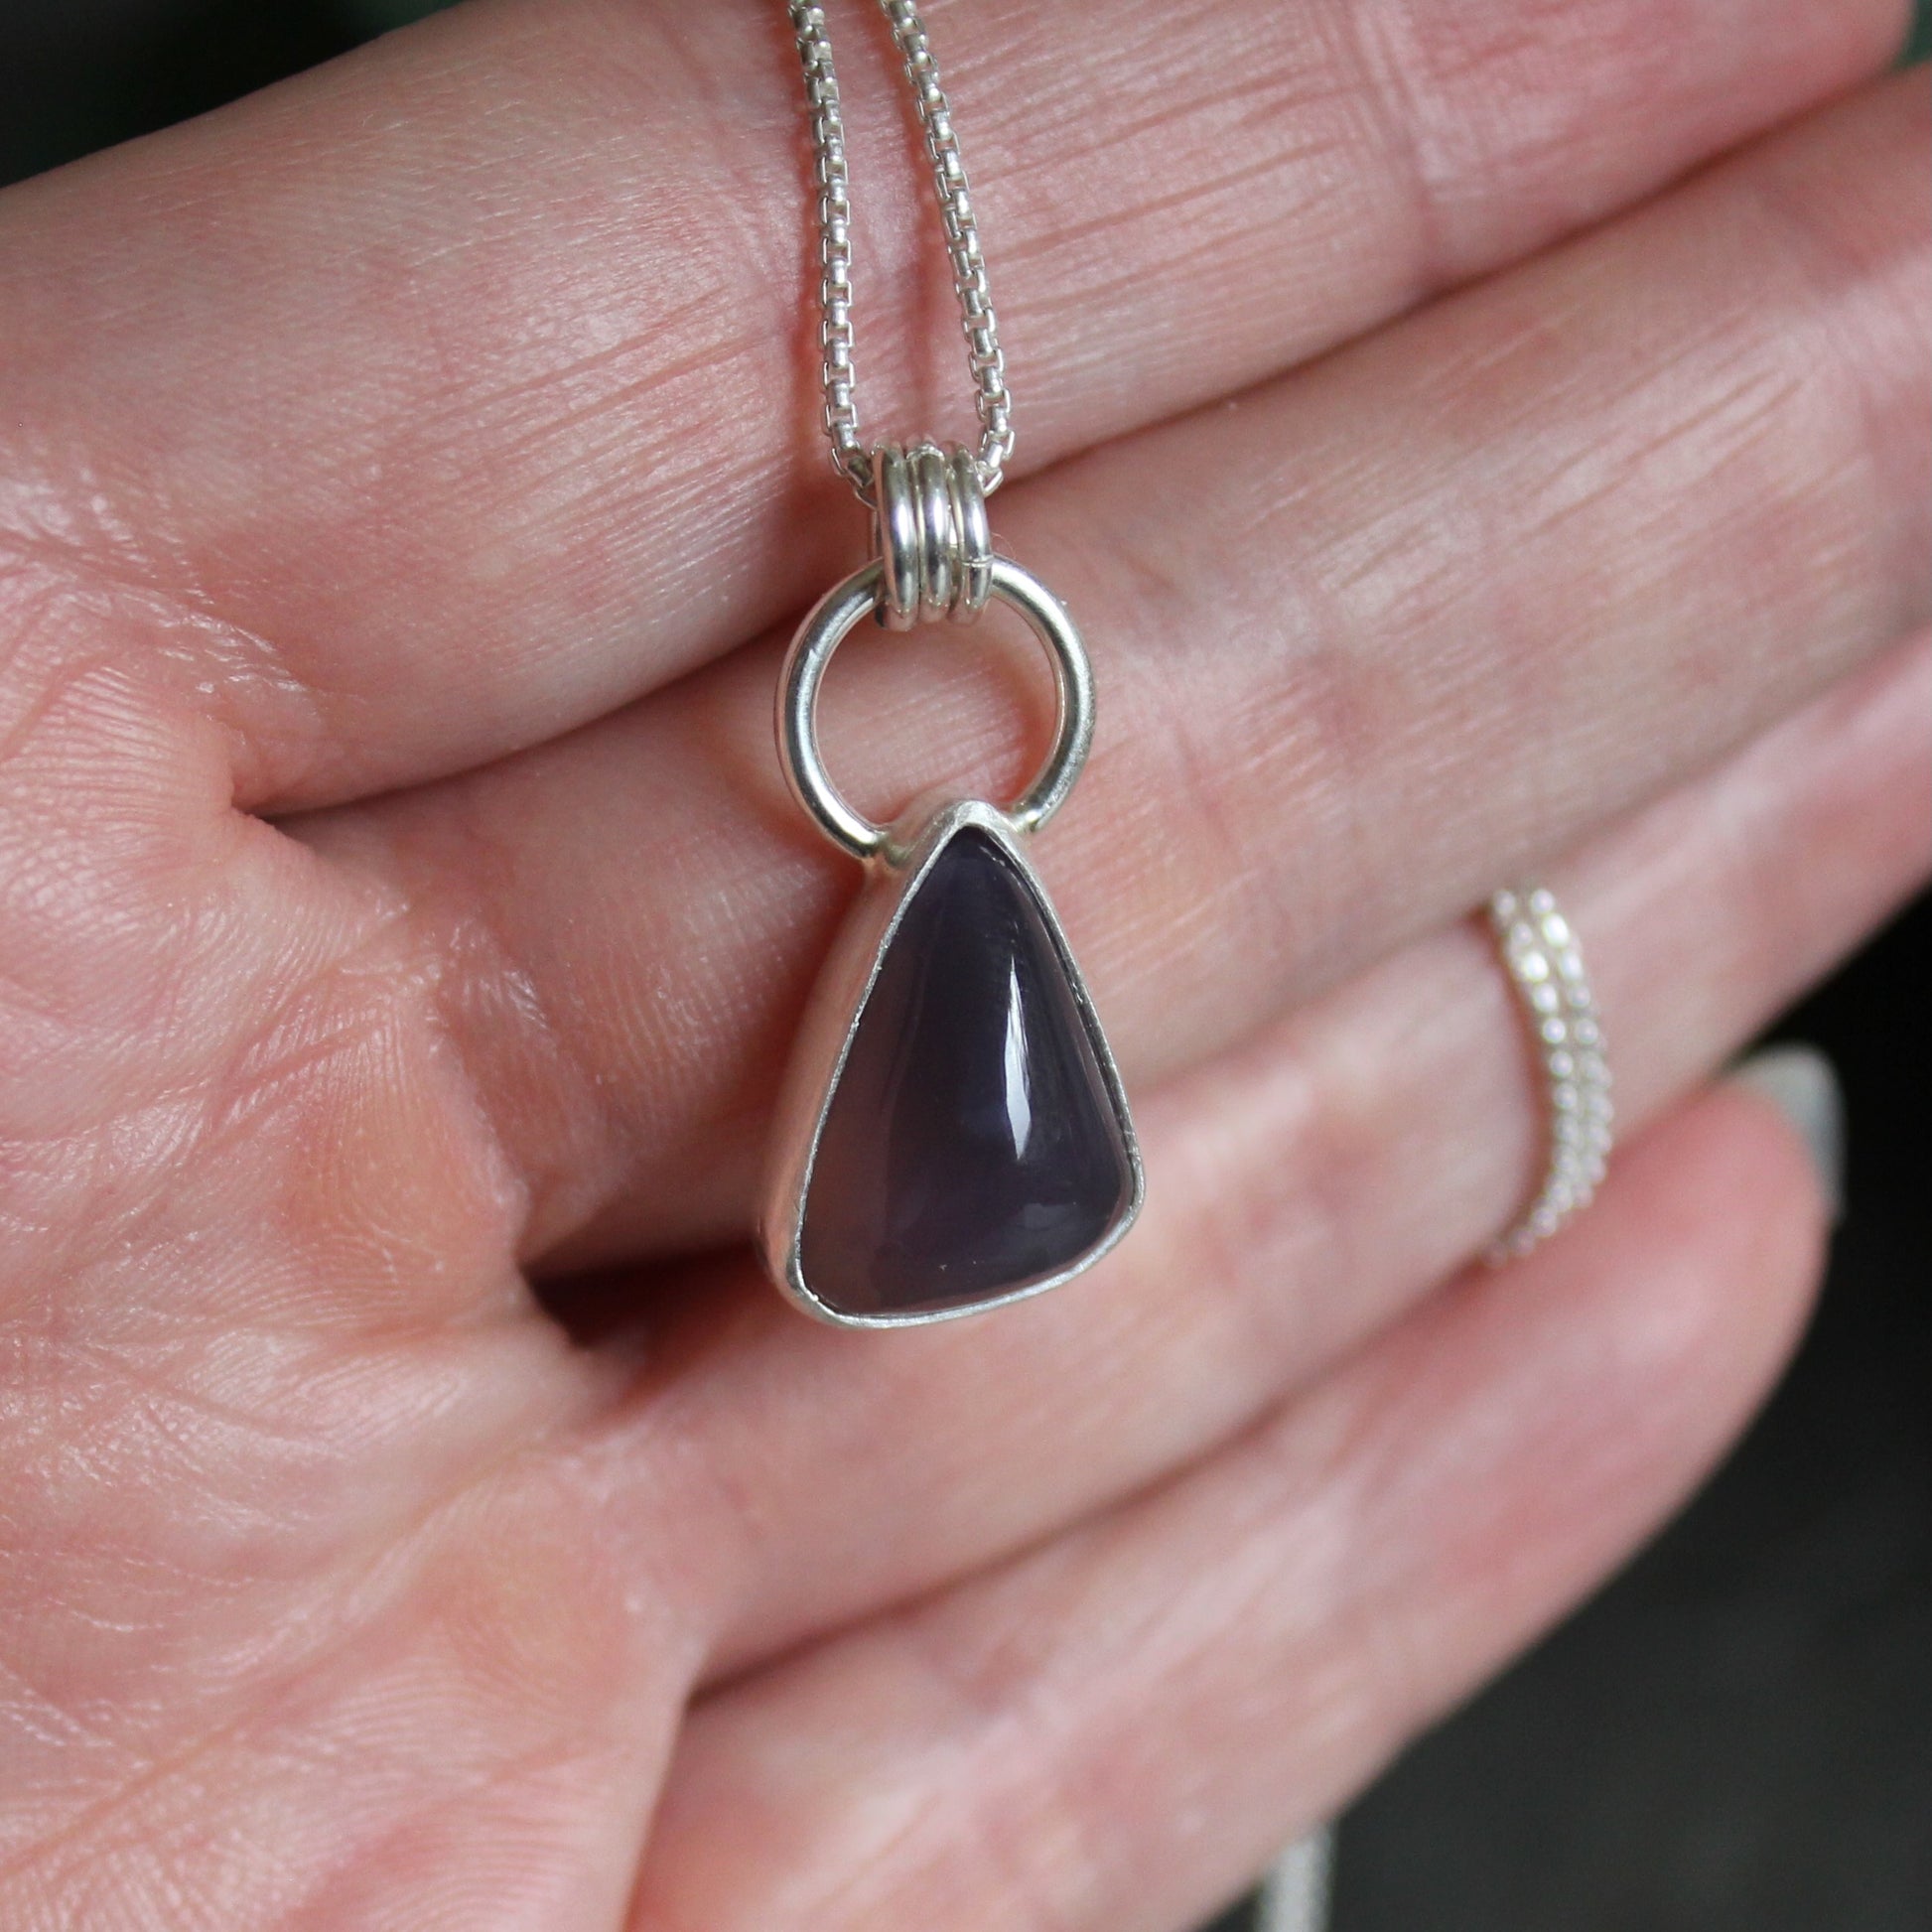 This is a small dark Holley blue agate set in a fine & sterling silver bezel setting and comes with an 18" chain. This stone is triangular shaped